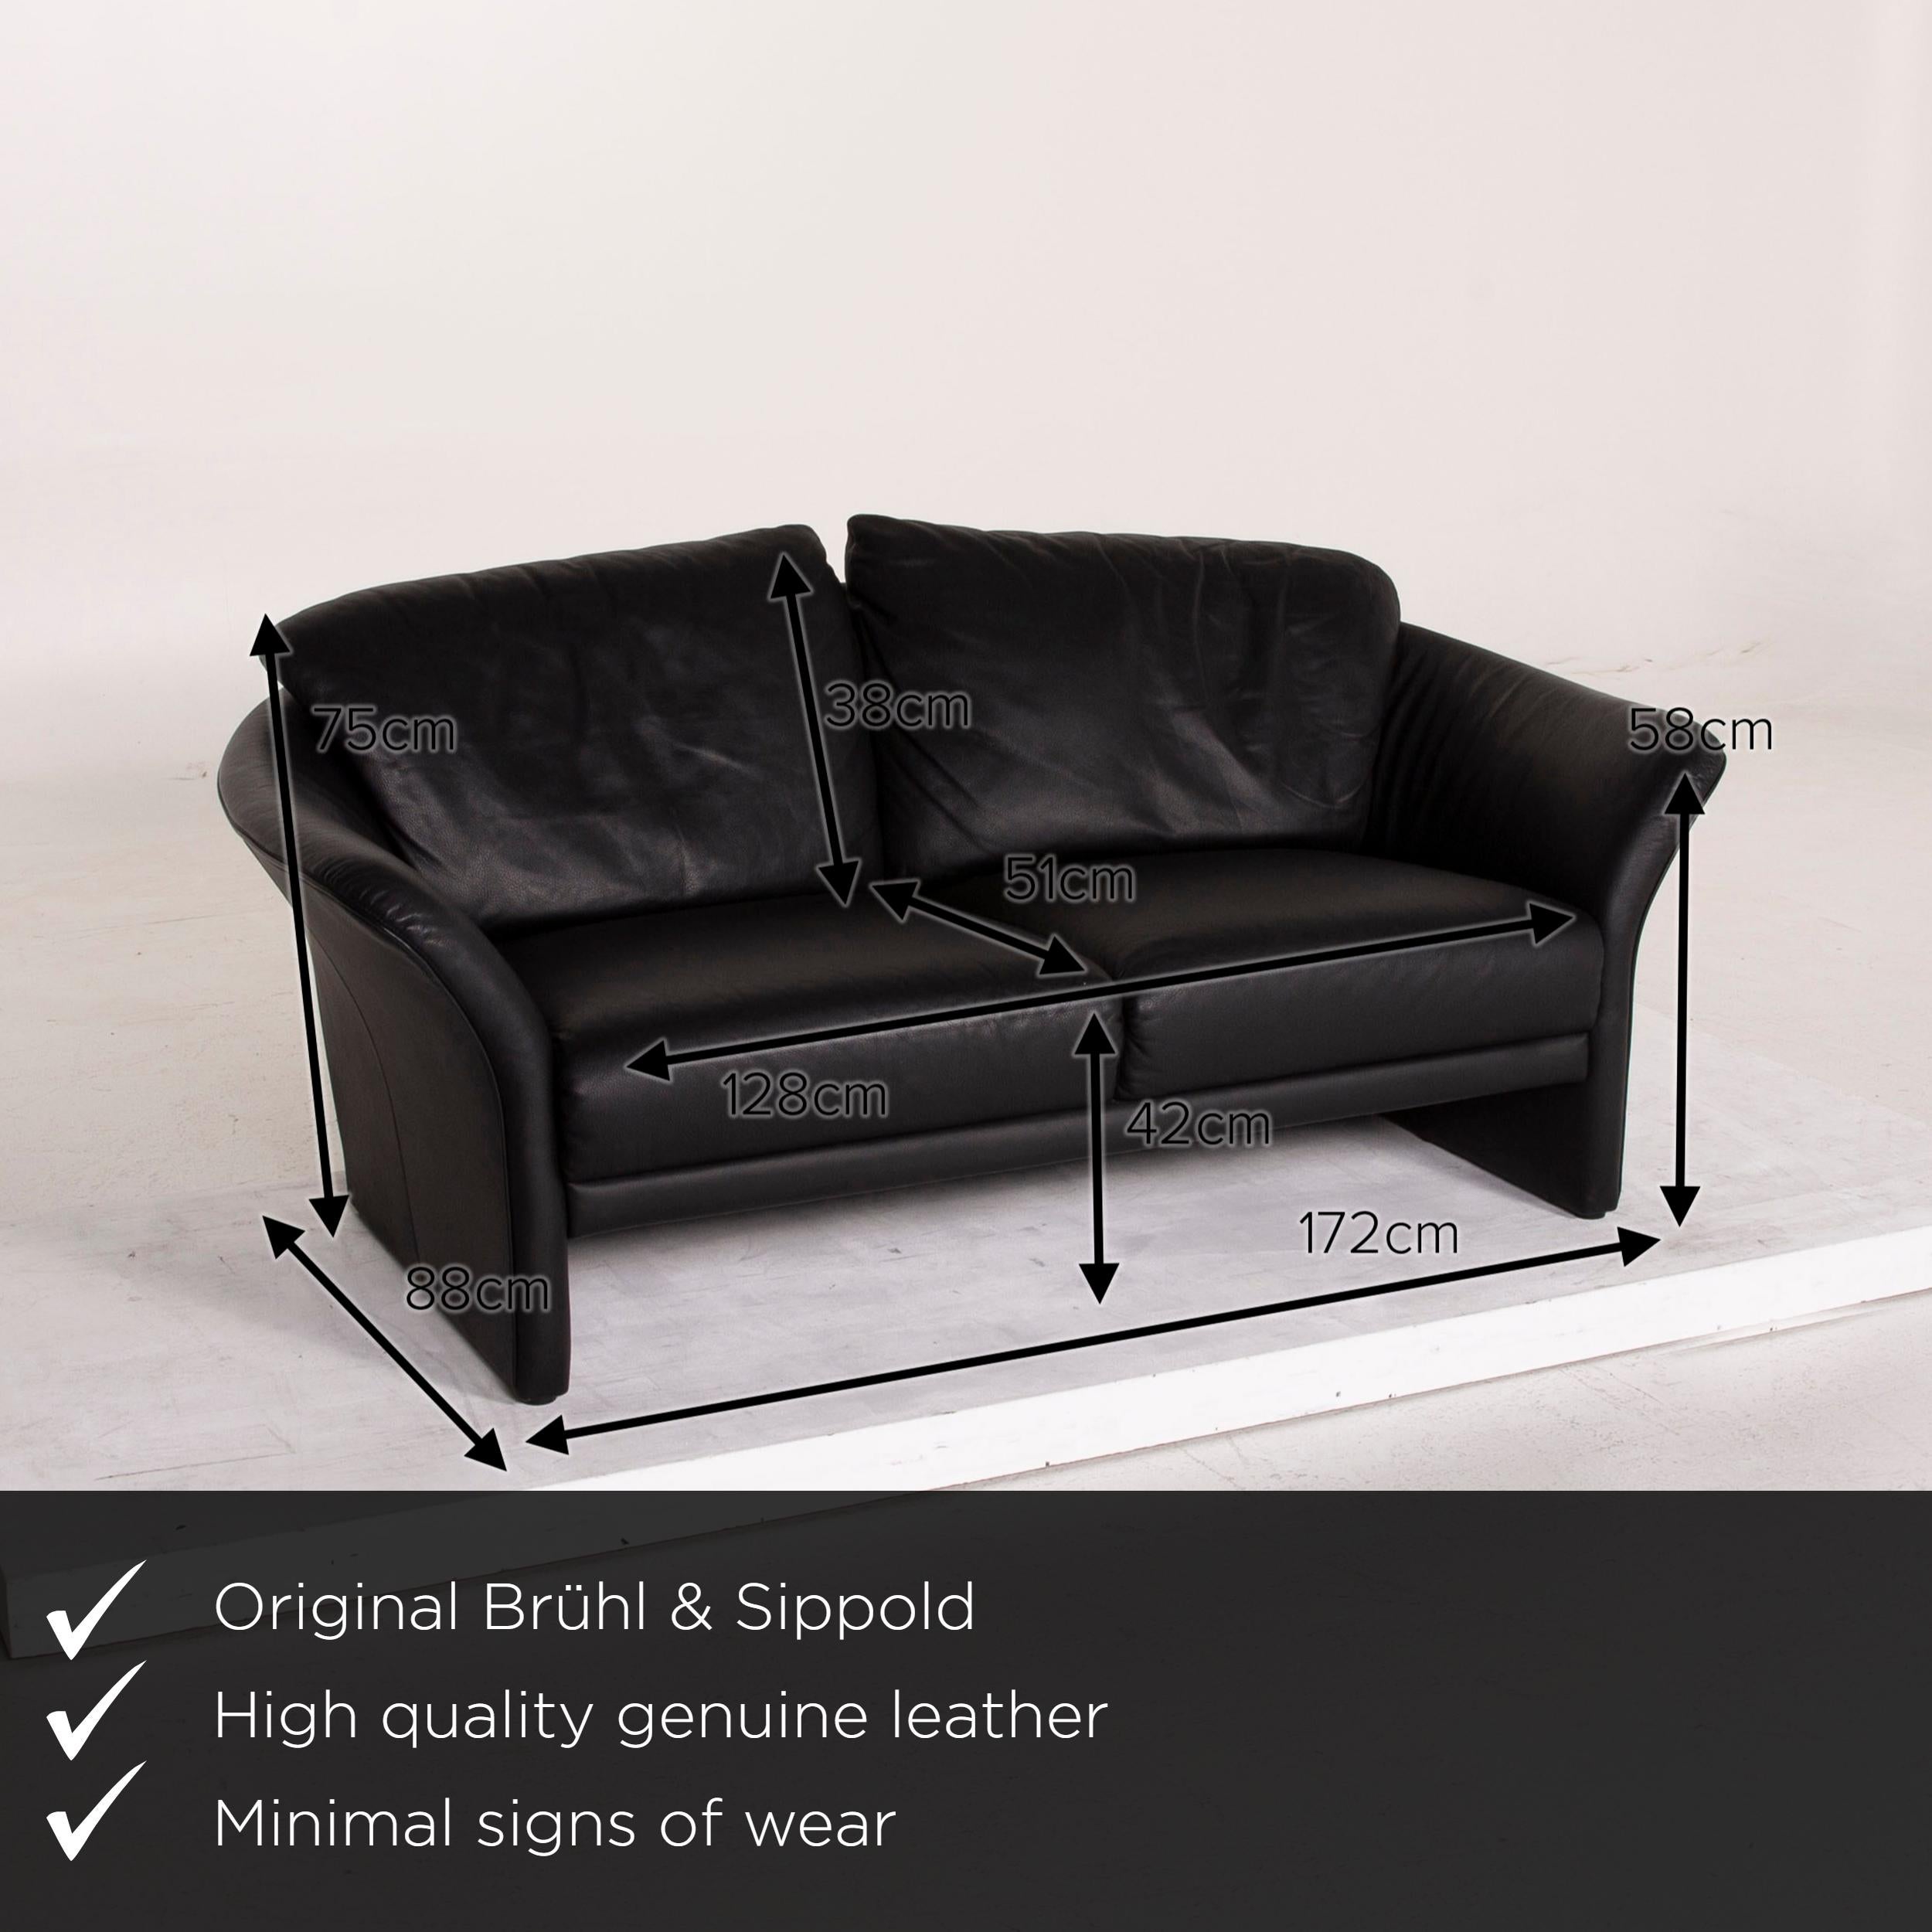 We present to you a Brühl & Sippold boa leather sofa black two-seat.

 

 Product measurements in centimeters:
 

Depth 88
Width 172
Height 75
Seat height 42
Rest height 58
Seat depth 51
Seat width 128
Back height 38.